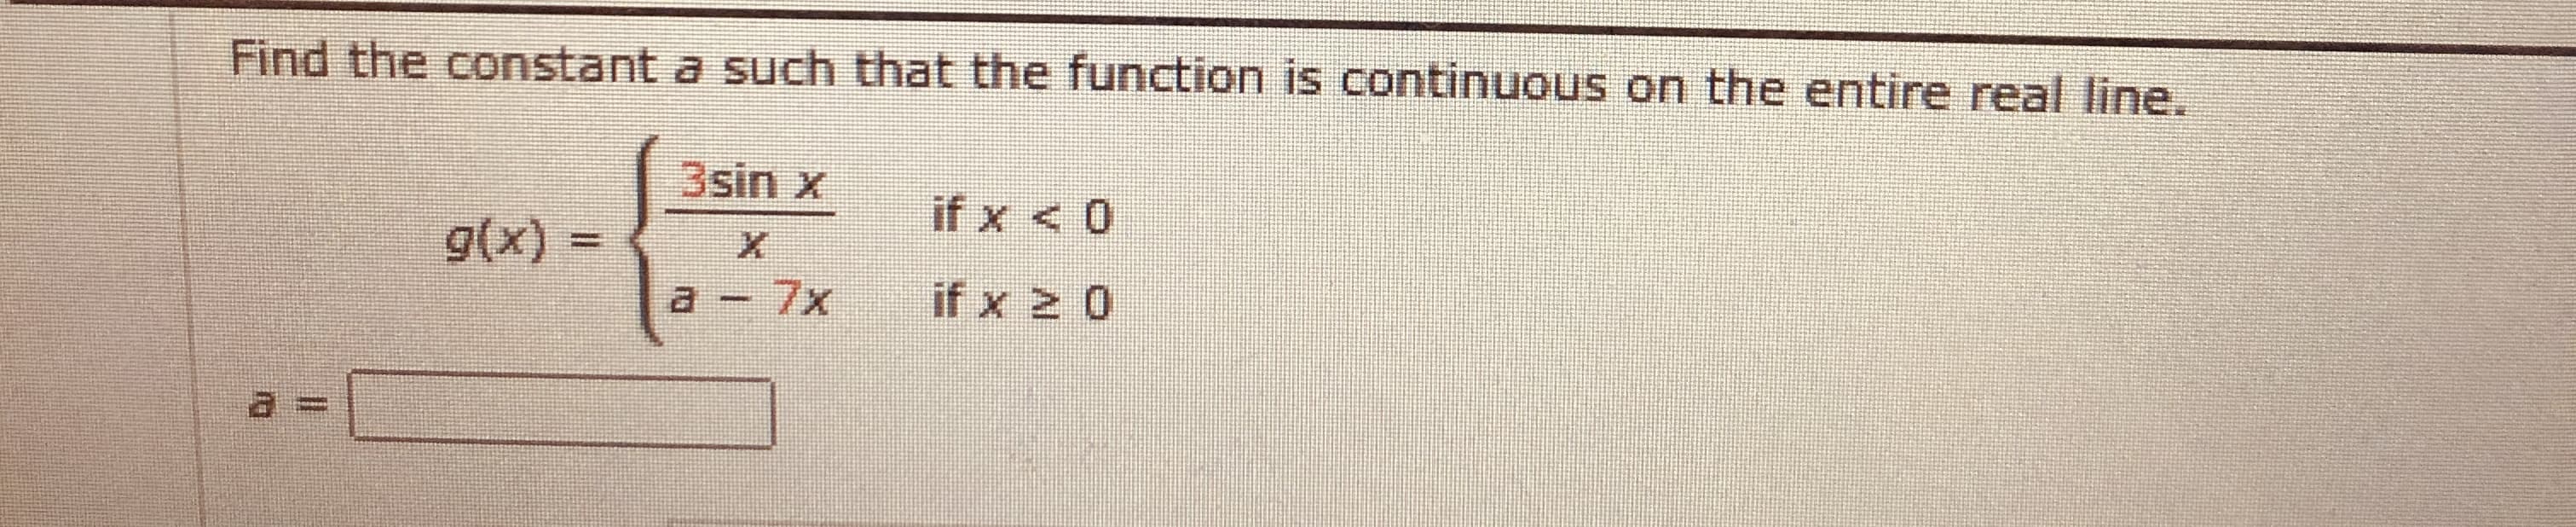 Find the constant a such that the function is continuous on the entire real line.
3sin x
if x < 0
9(x) =
%3D
a - 7x
if x 2 0
